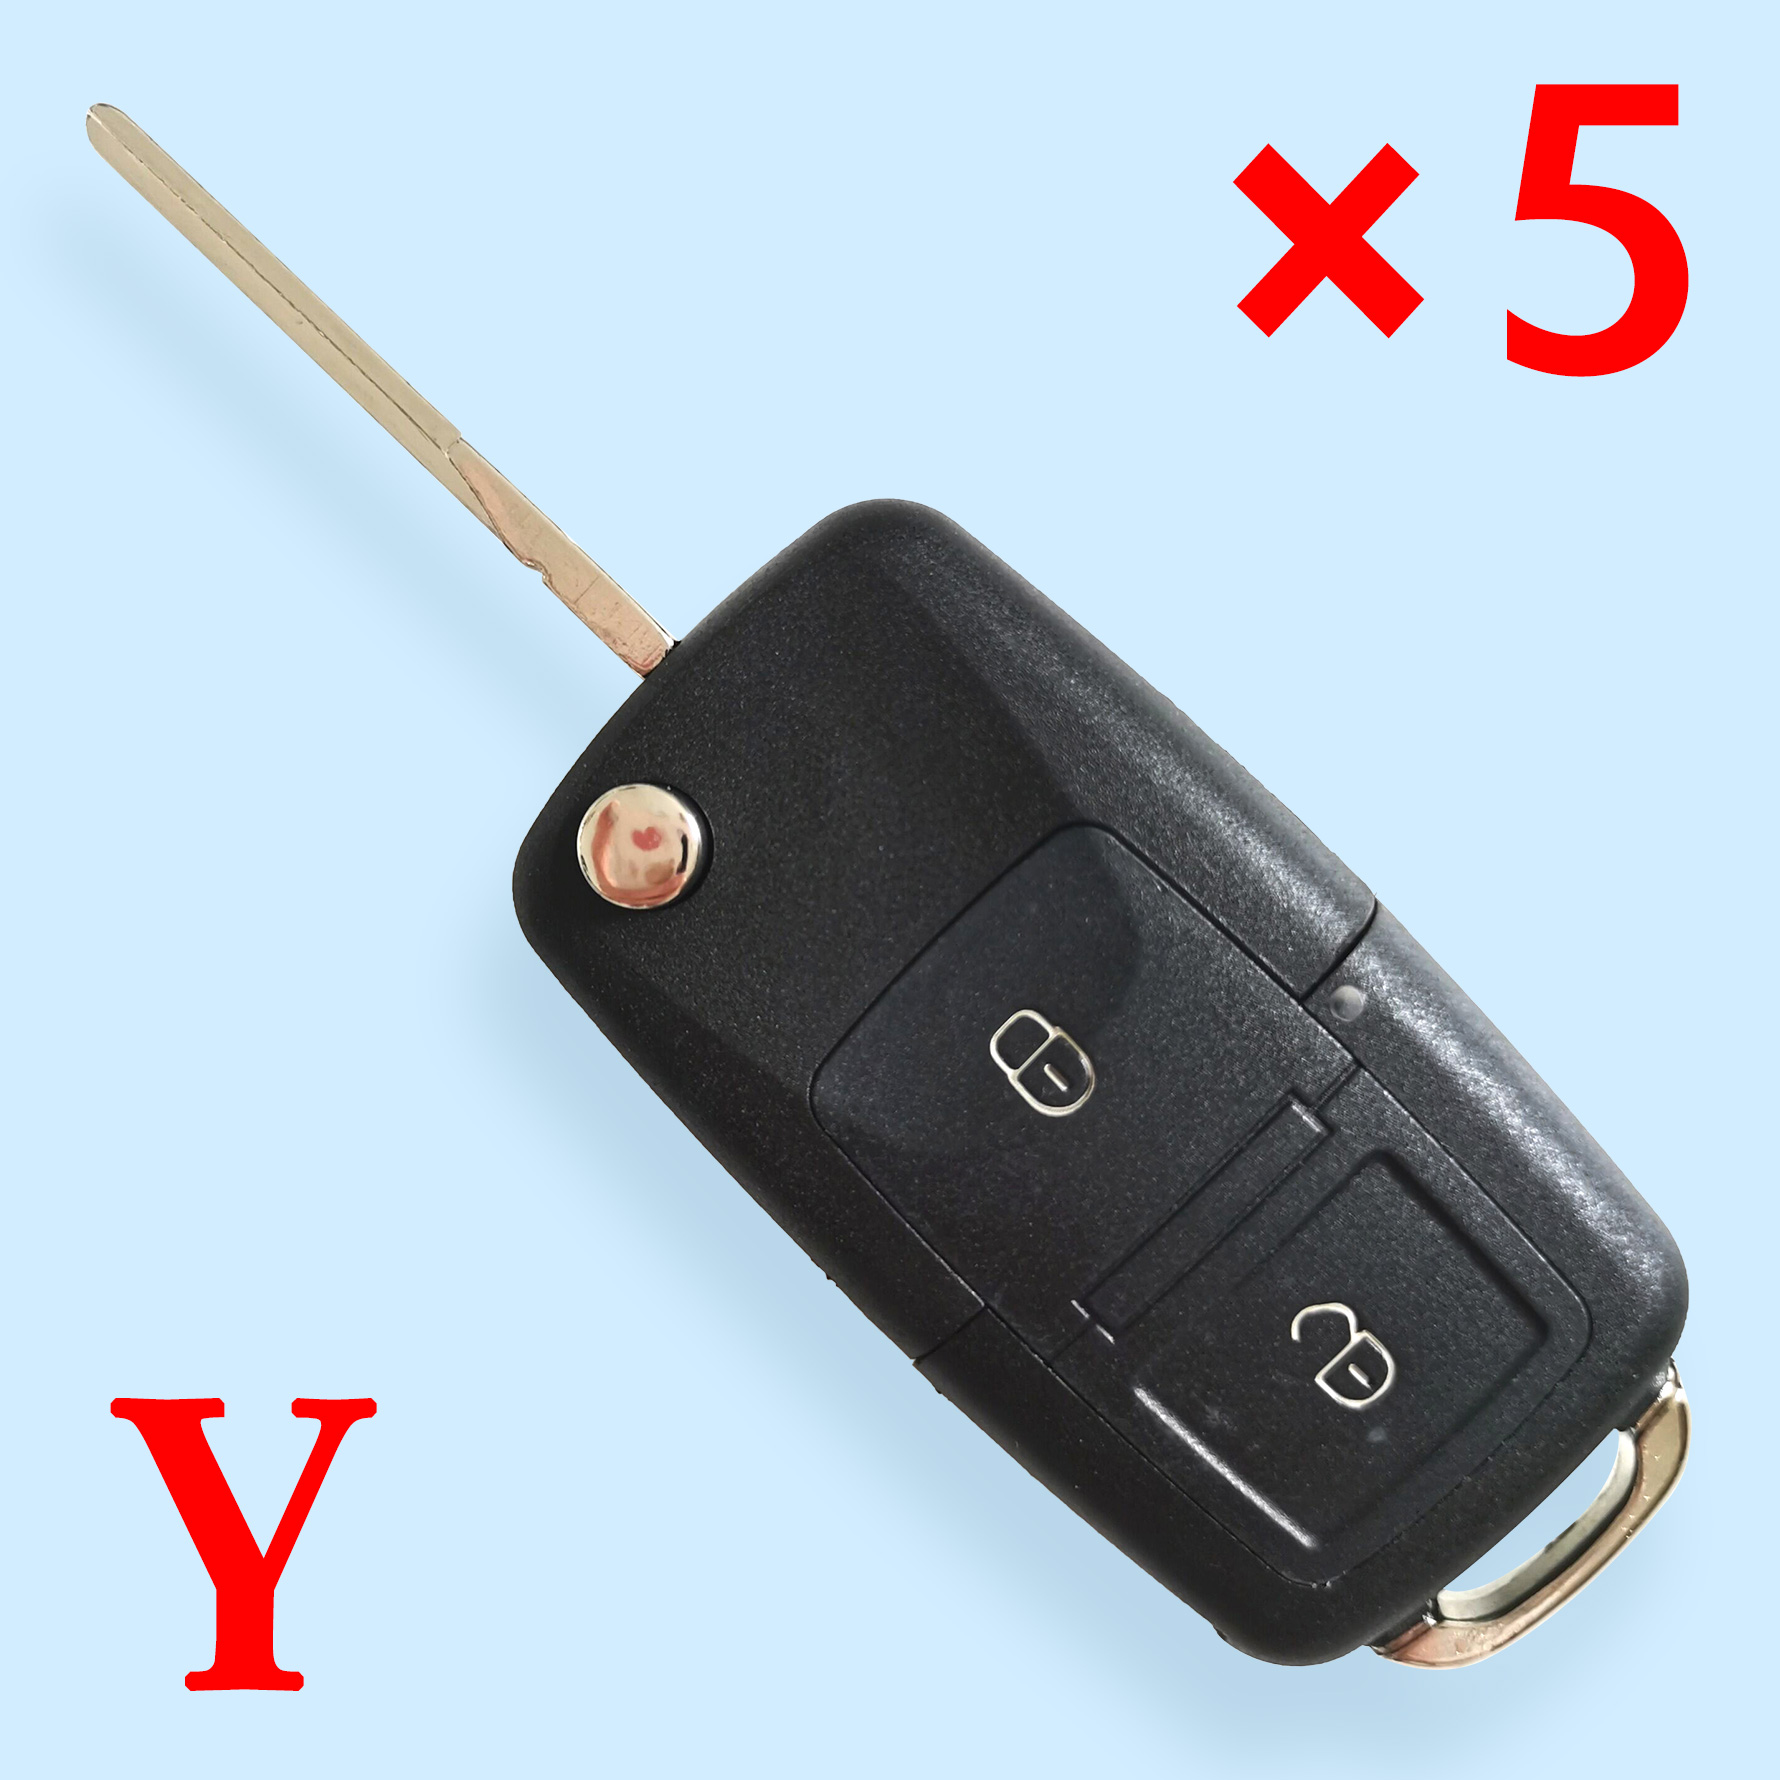 2 Buttons Remote Flip Folding Car Key Shell for VW Volkswagen MK4 Bora Golf 4 5 6 Passat Polo Bora Touran with Blade - Pack of 5